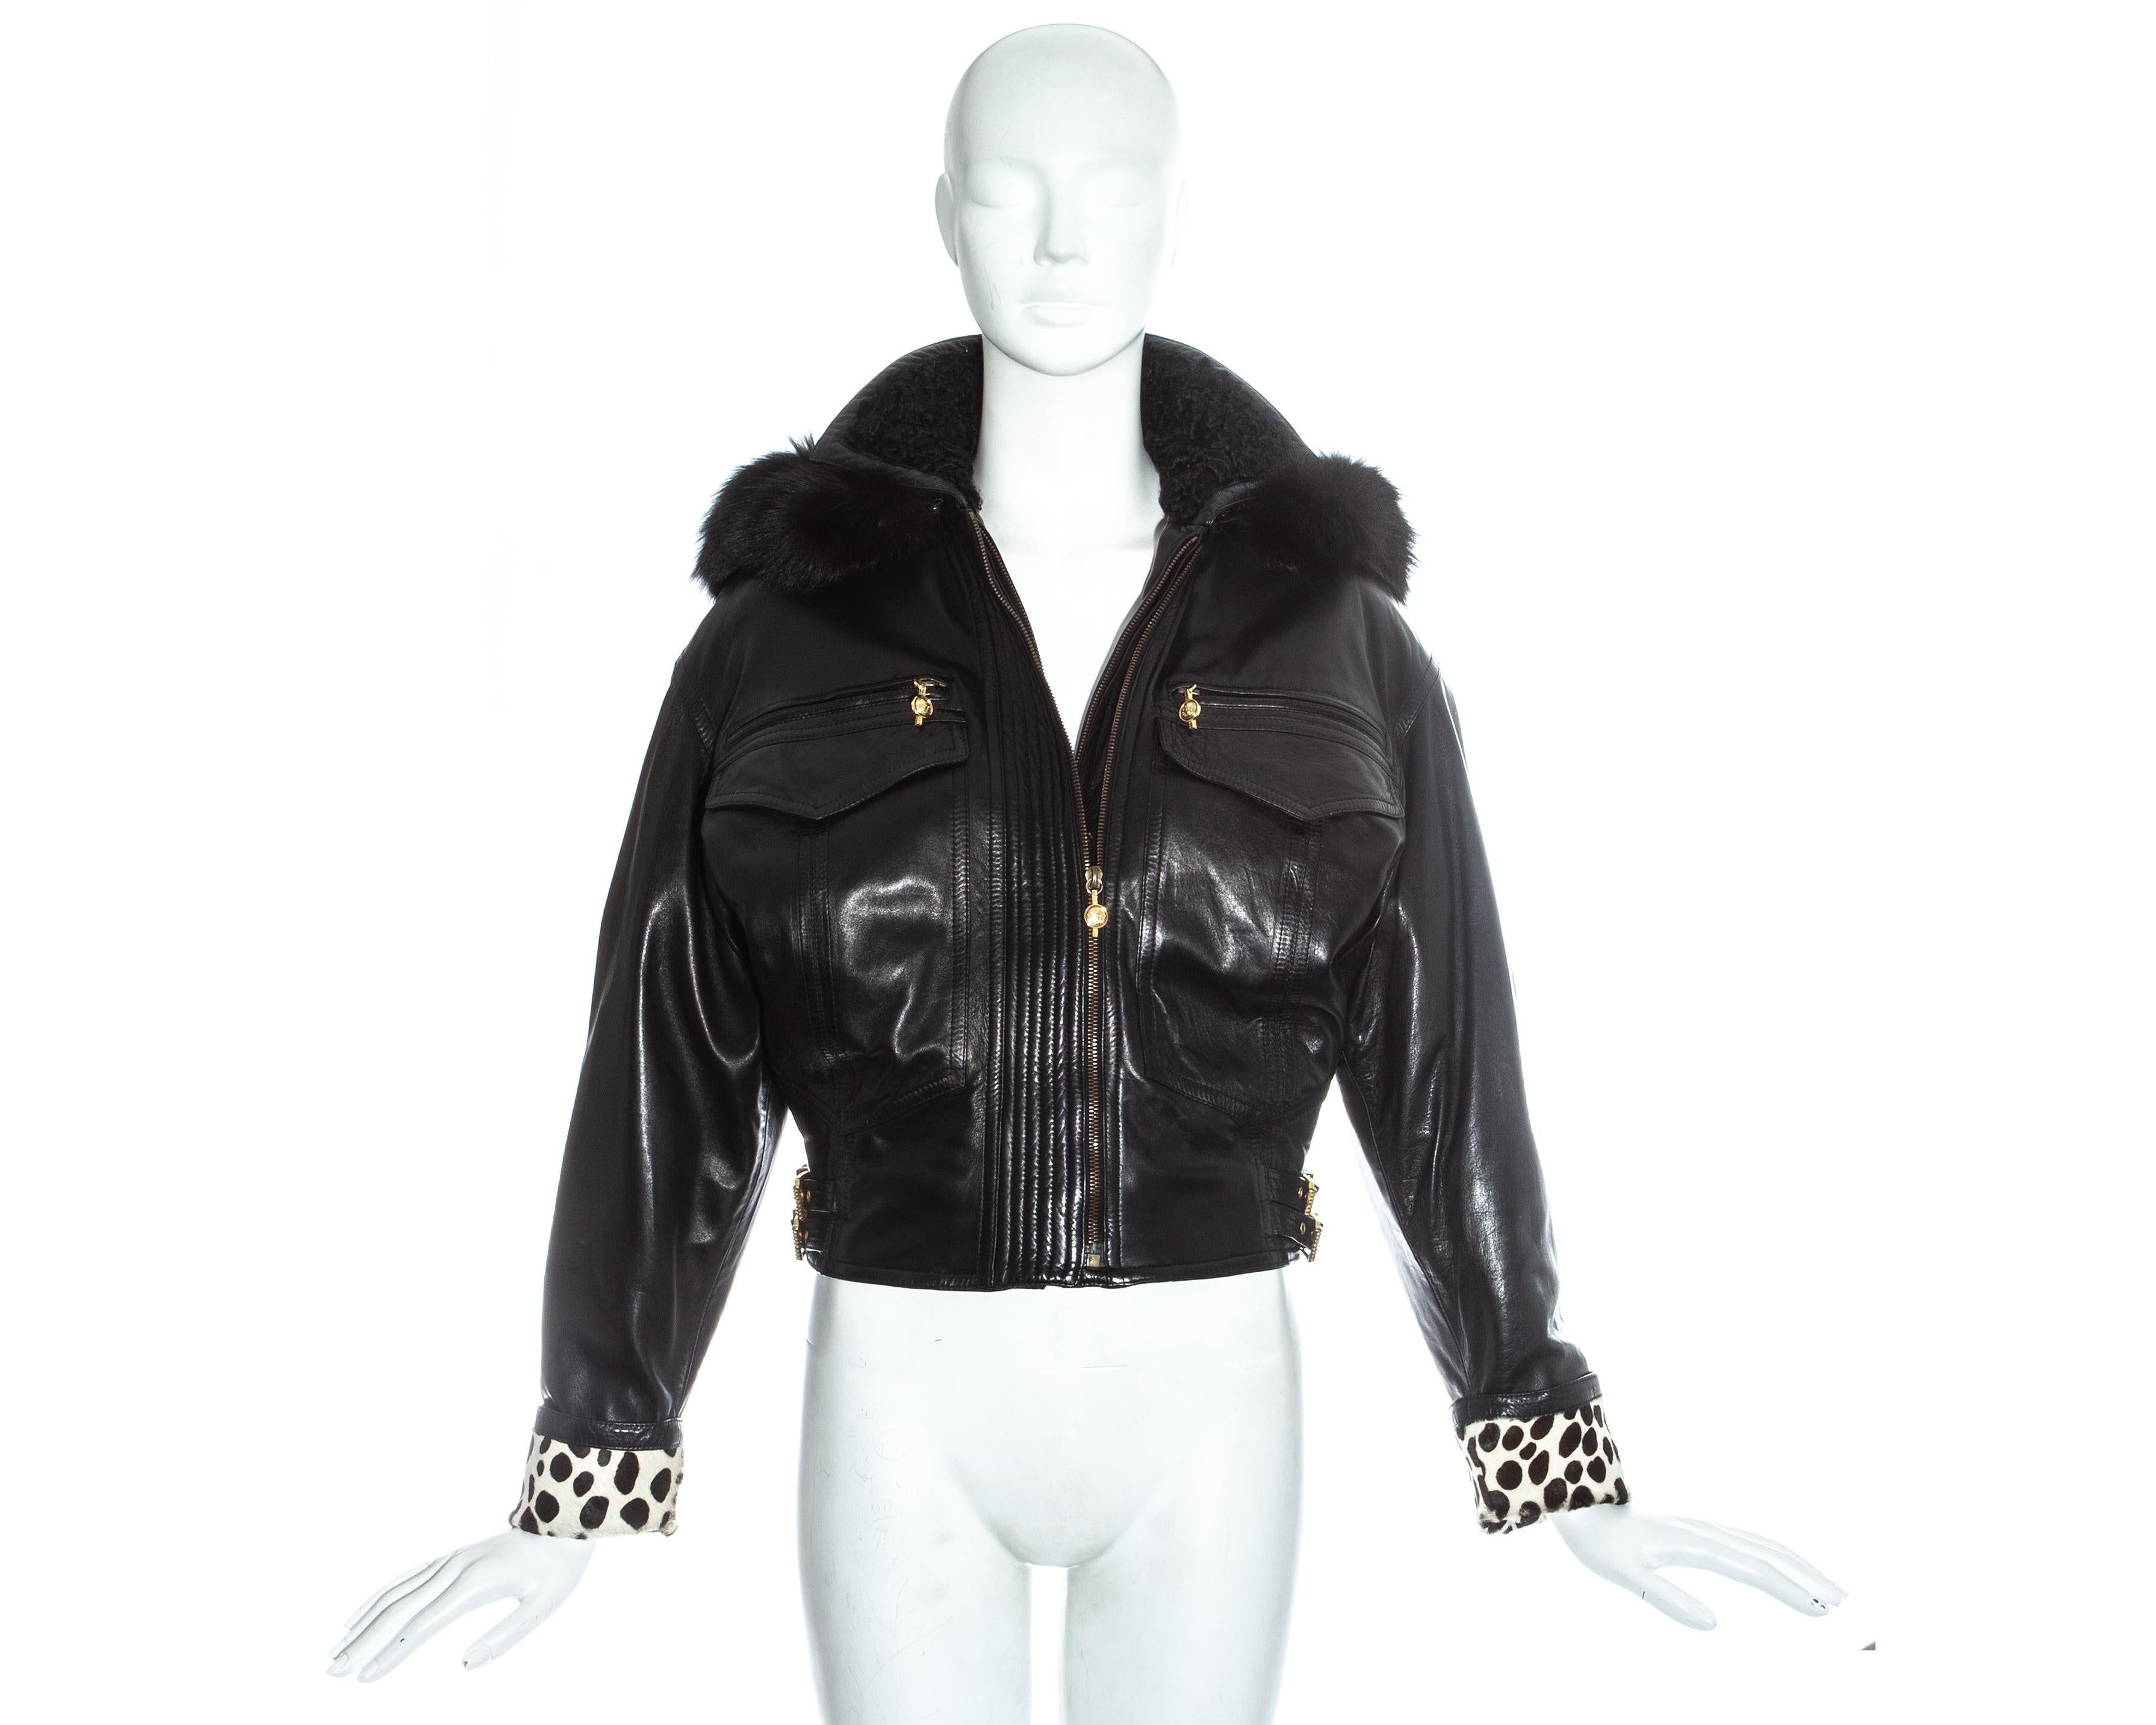 Gianni Versace black leather bomber jacket with signature Versace western-style gilt buckles to waist, two front pockets with gilt Medusa head zip pulls, spotted ponyhide cuffs and detachable fur-lined hood.

Fall-Winter 1992 